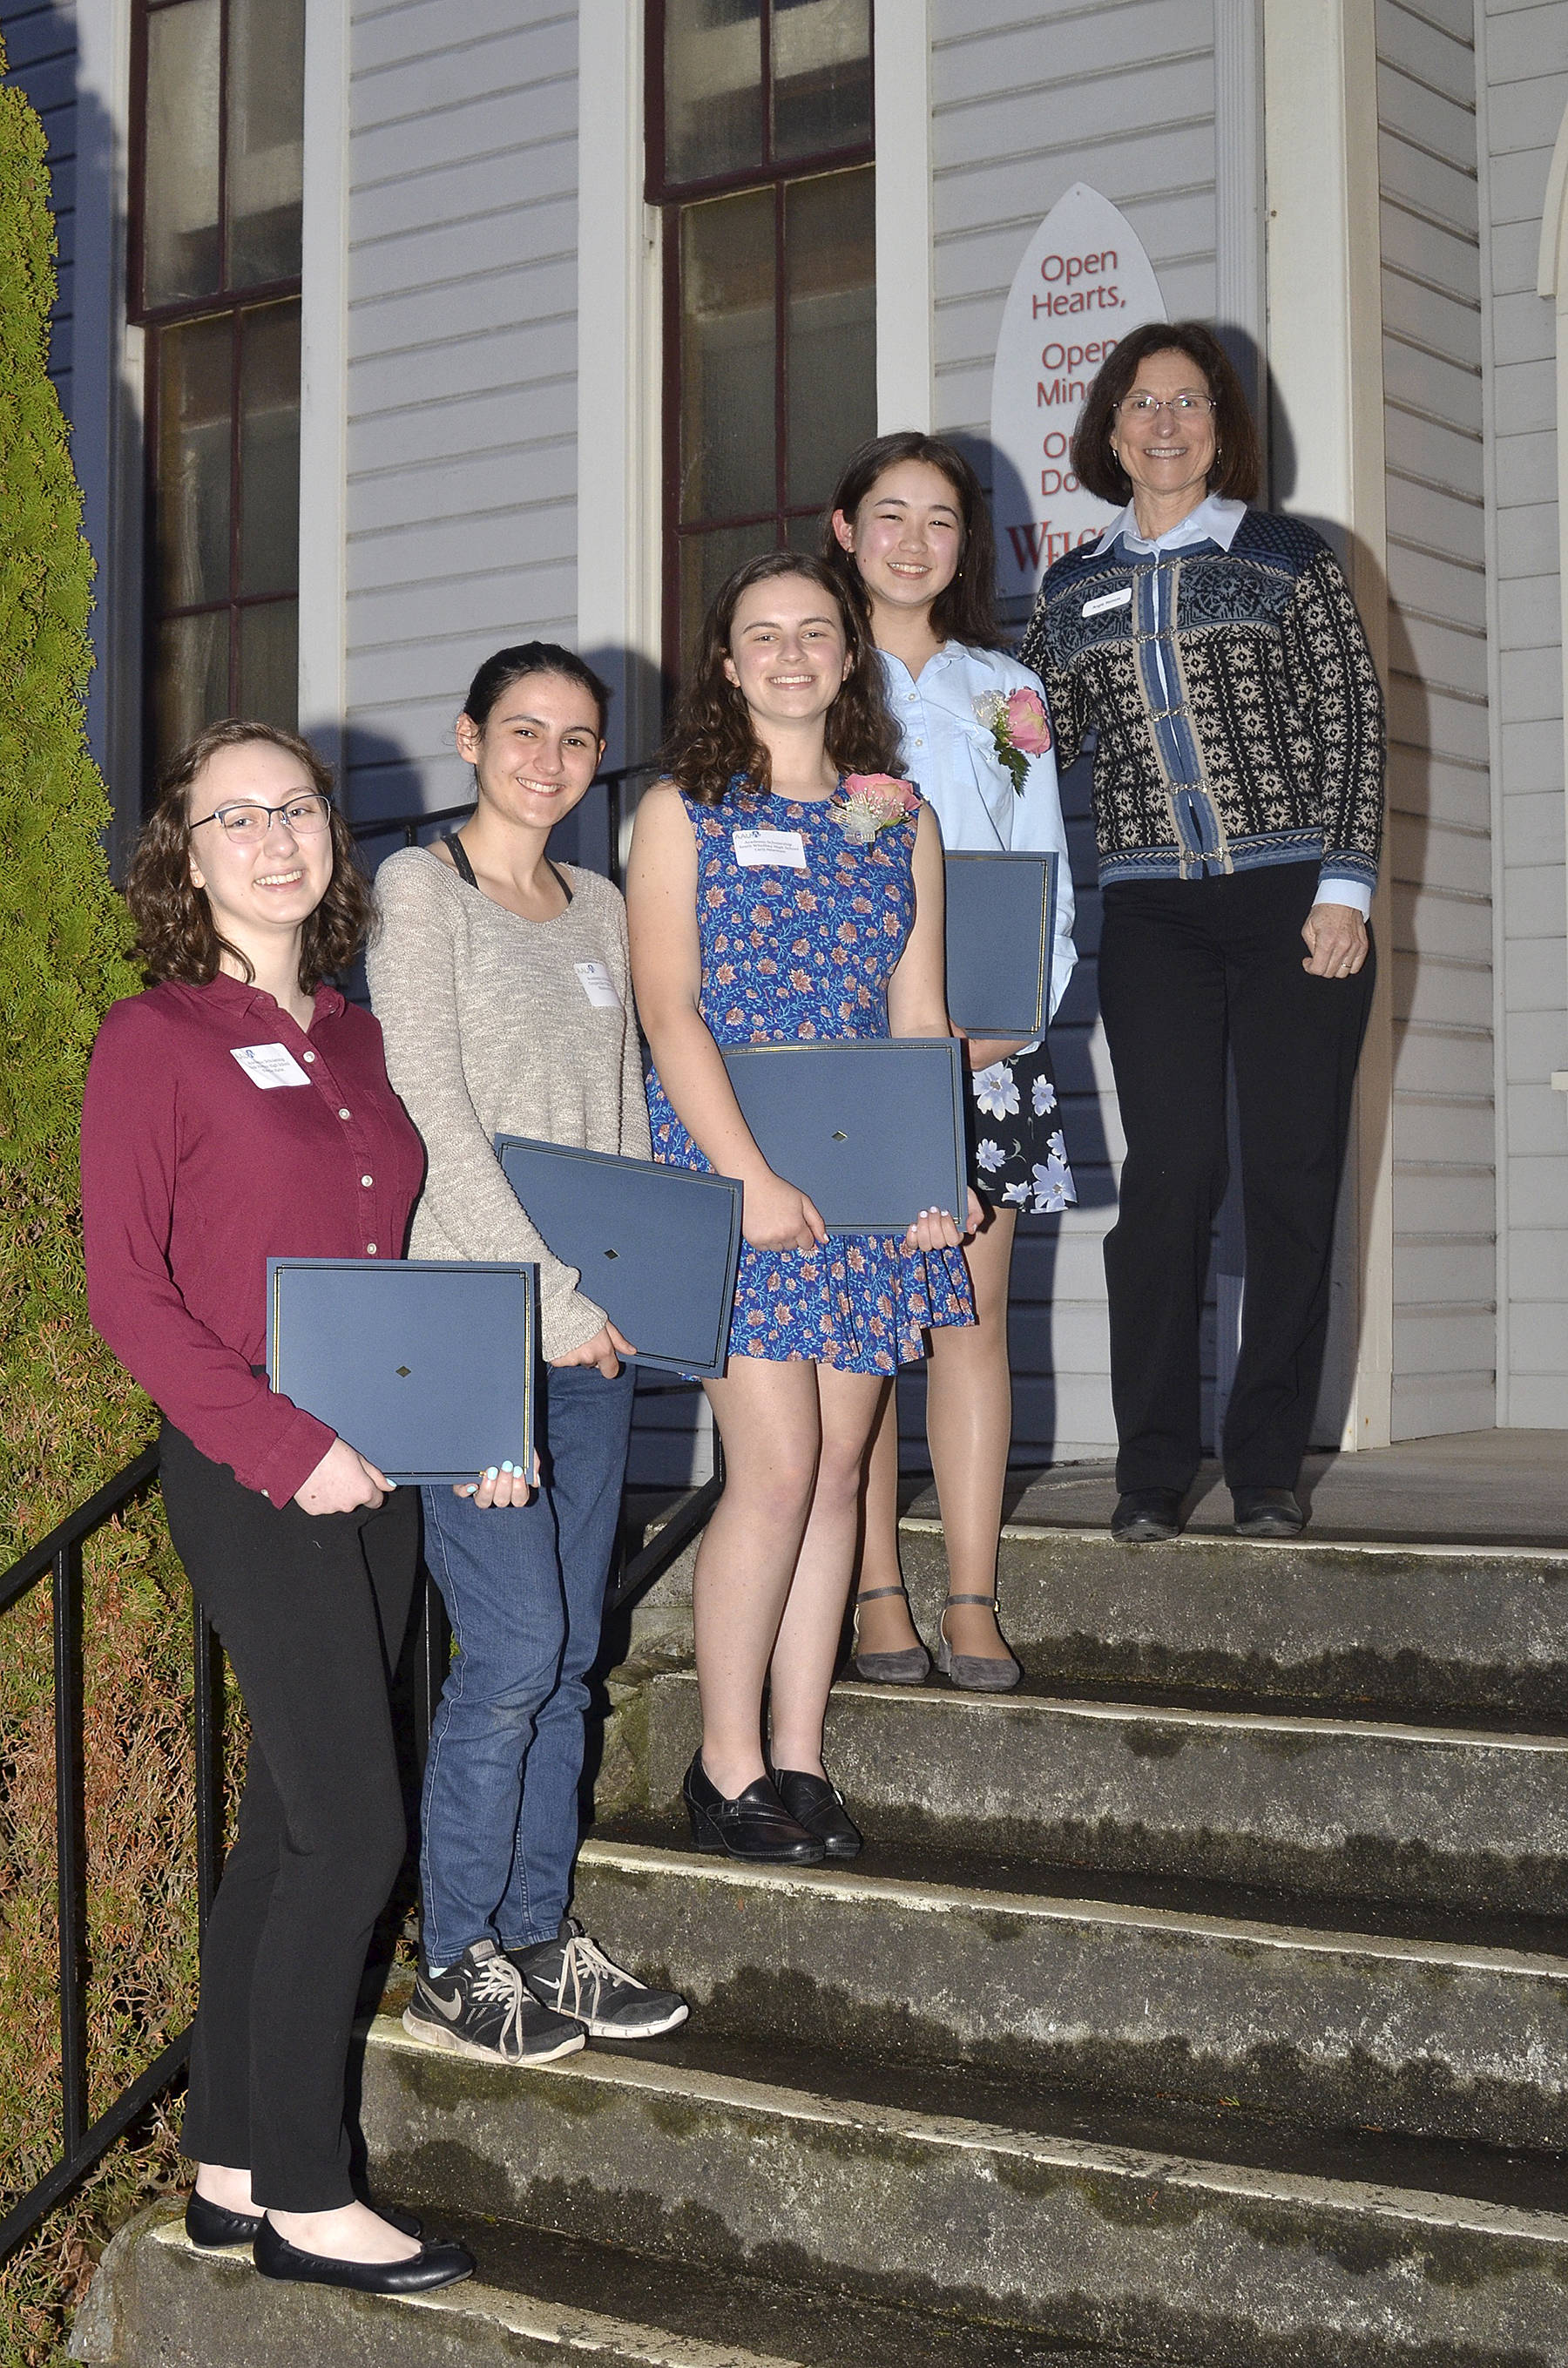 Photos provided. Pictured from left to right are scholarship recipients Natalie Hahn of Oak Harbor High School, Madison Rixe of Coupeville High School, Carli Newman of South Whidbey High School, Sierra Brackeen of Oak Harbor High School, and AAUW Academic Scholar Chair Angie Homola.